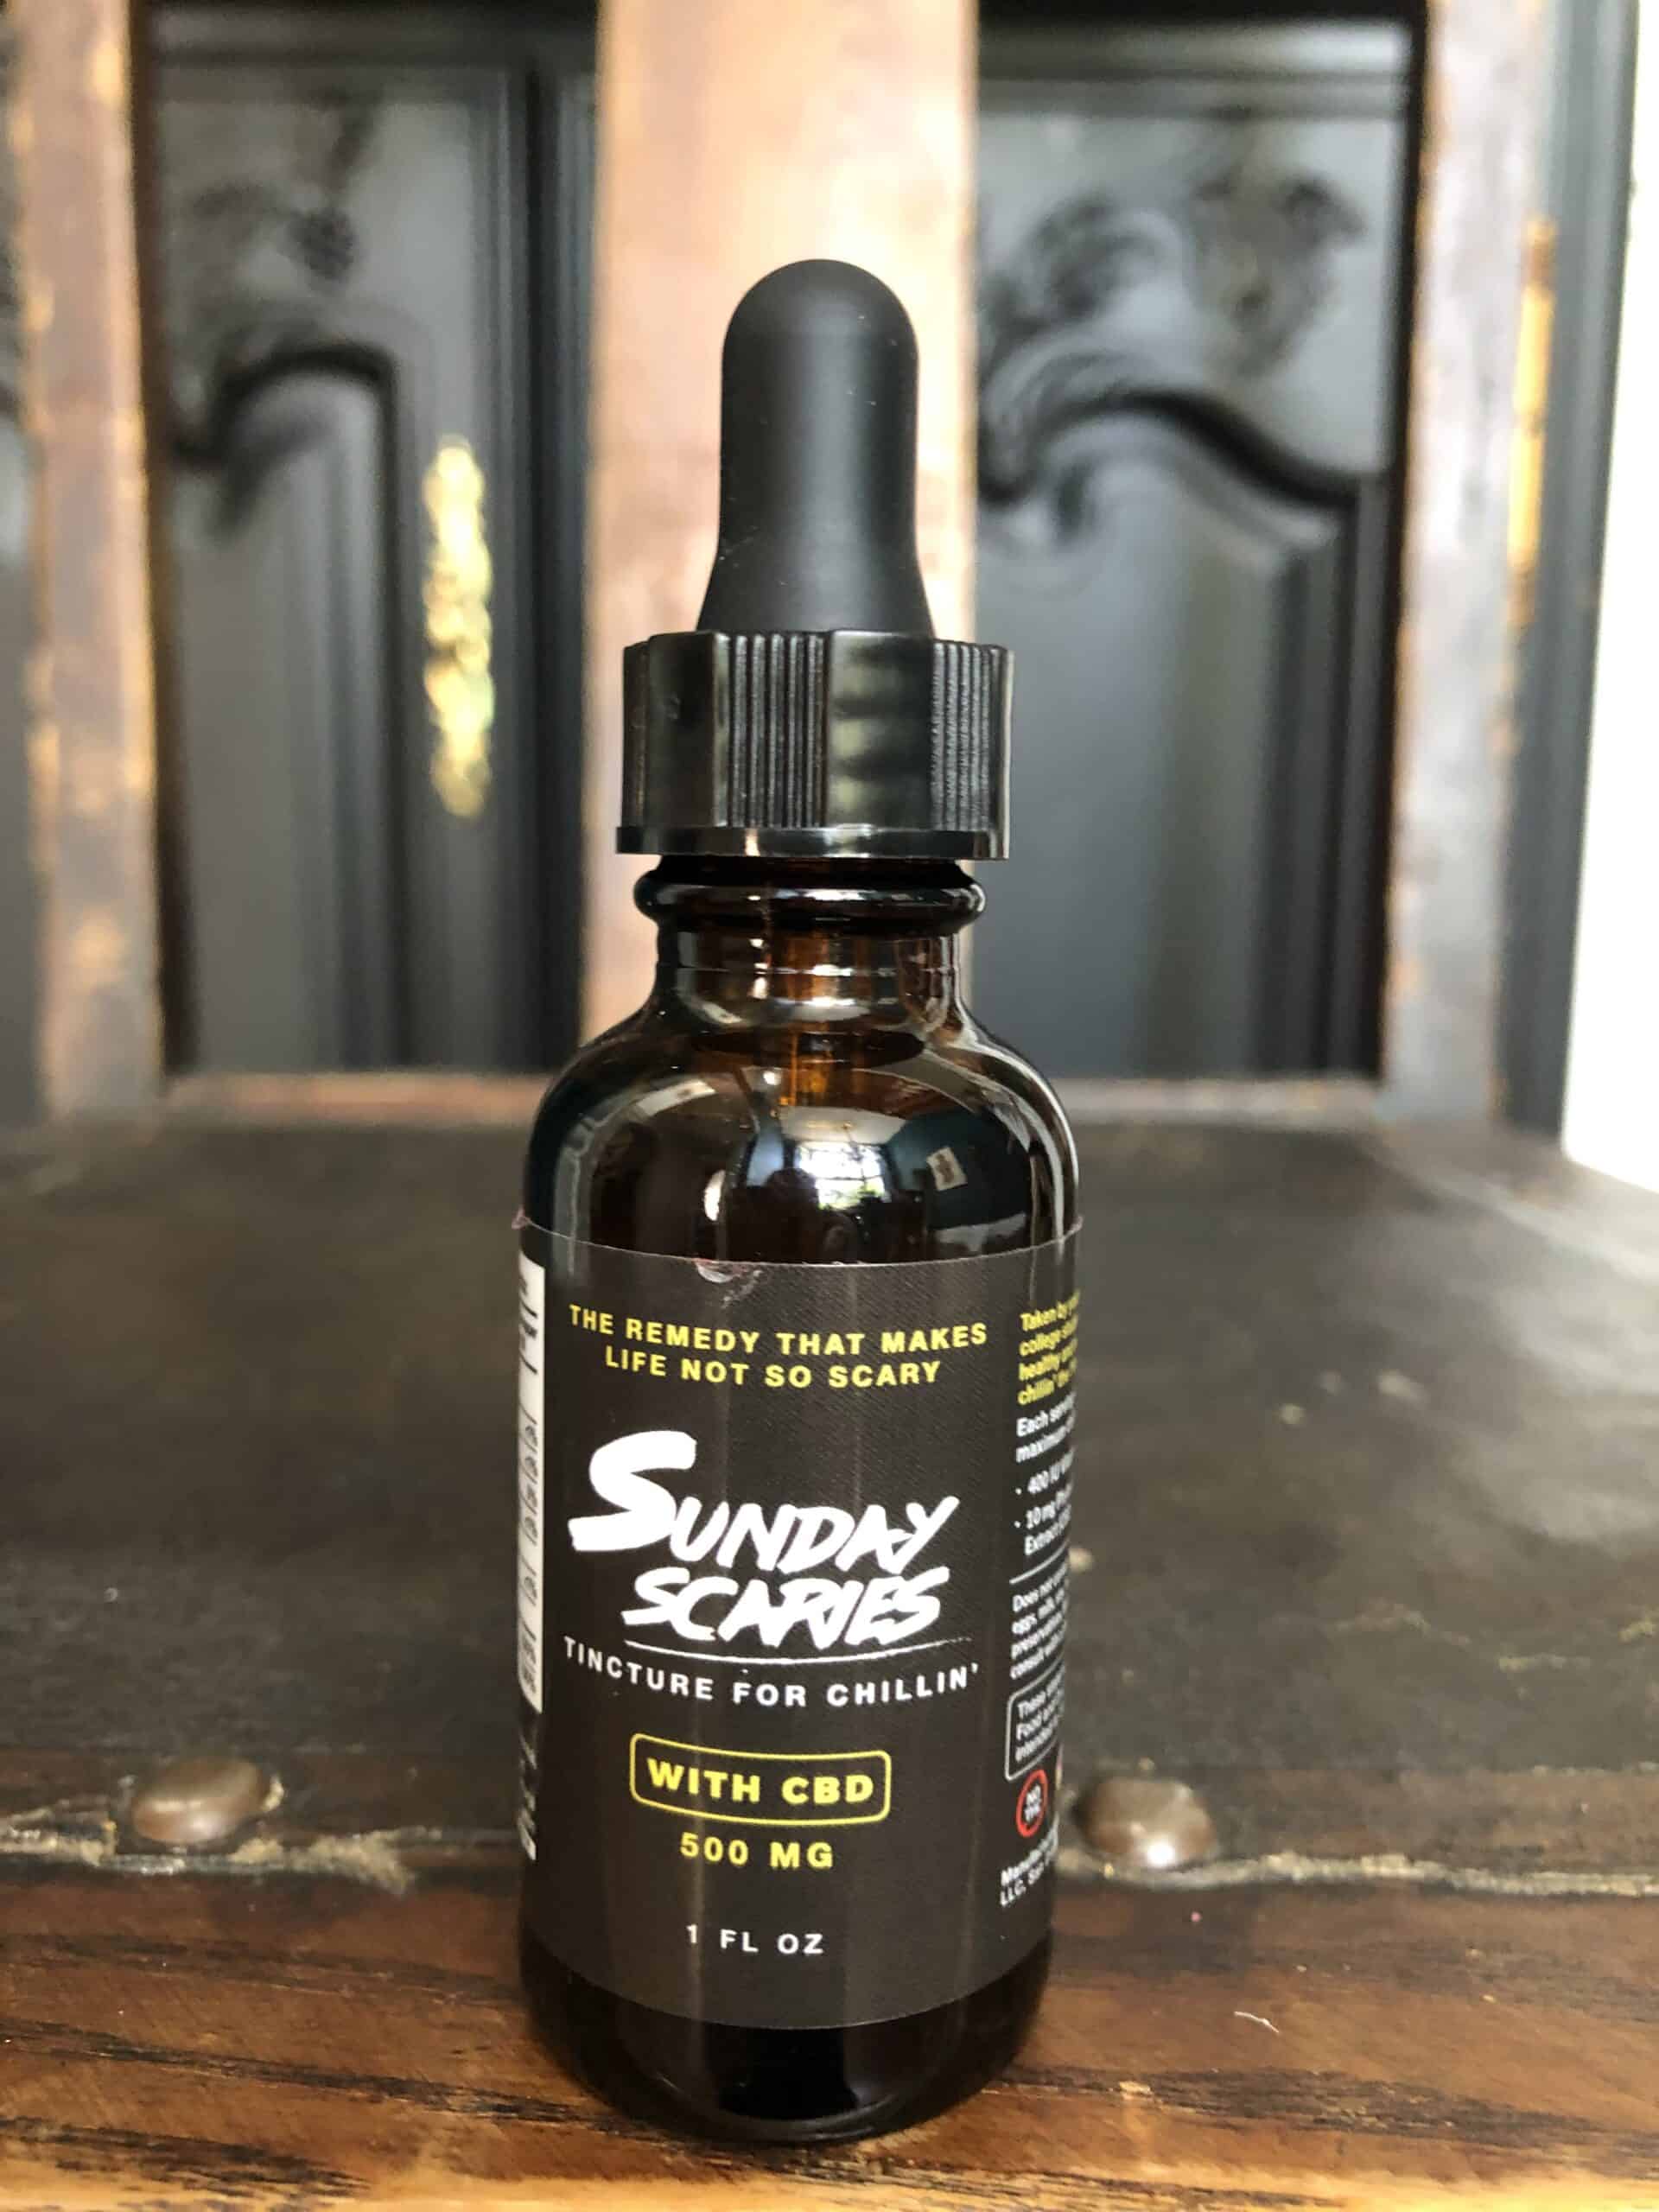 Sunday Scaries CBD Oil Tincture Save On Cannabis Review